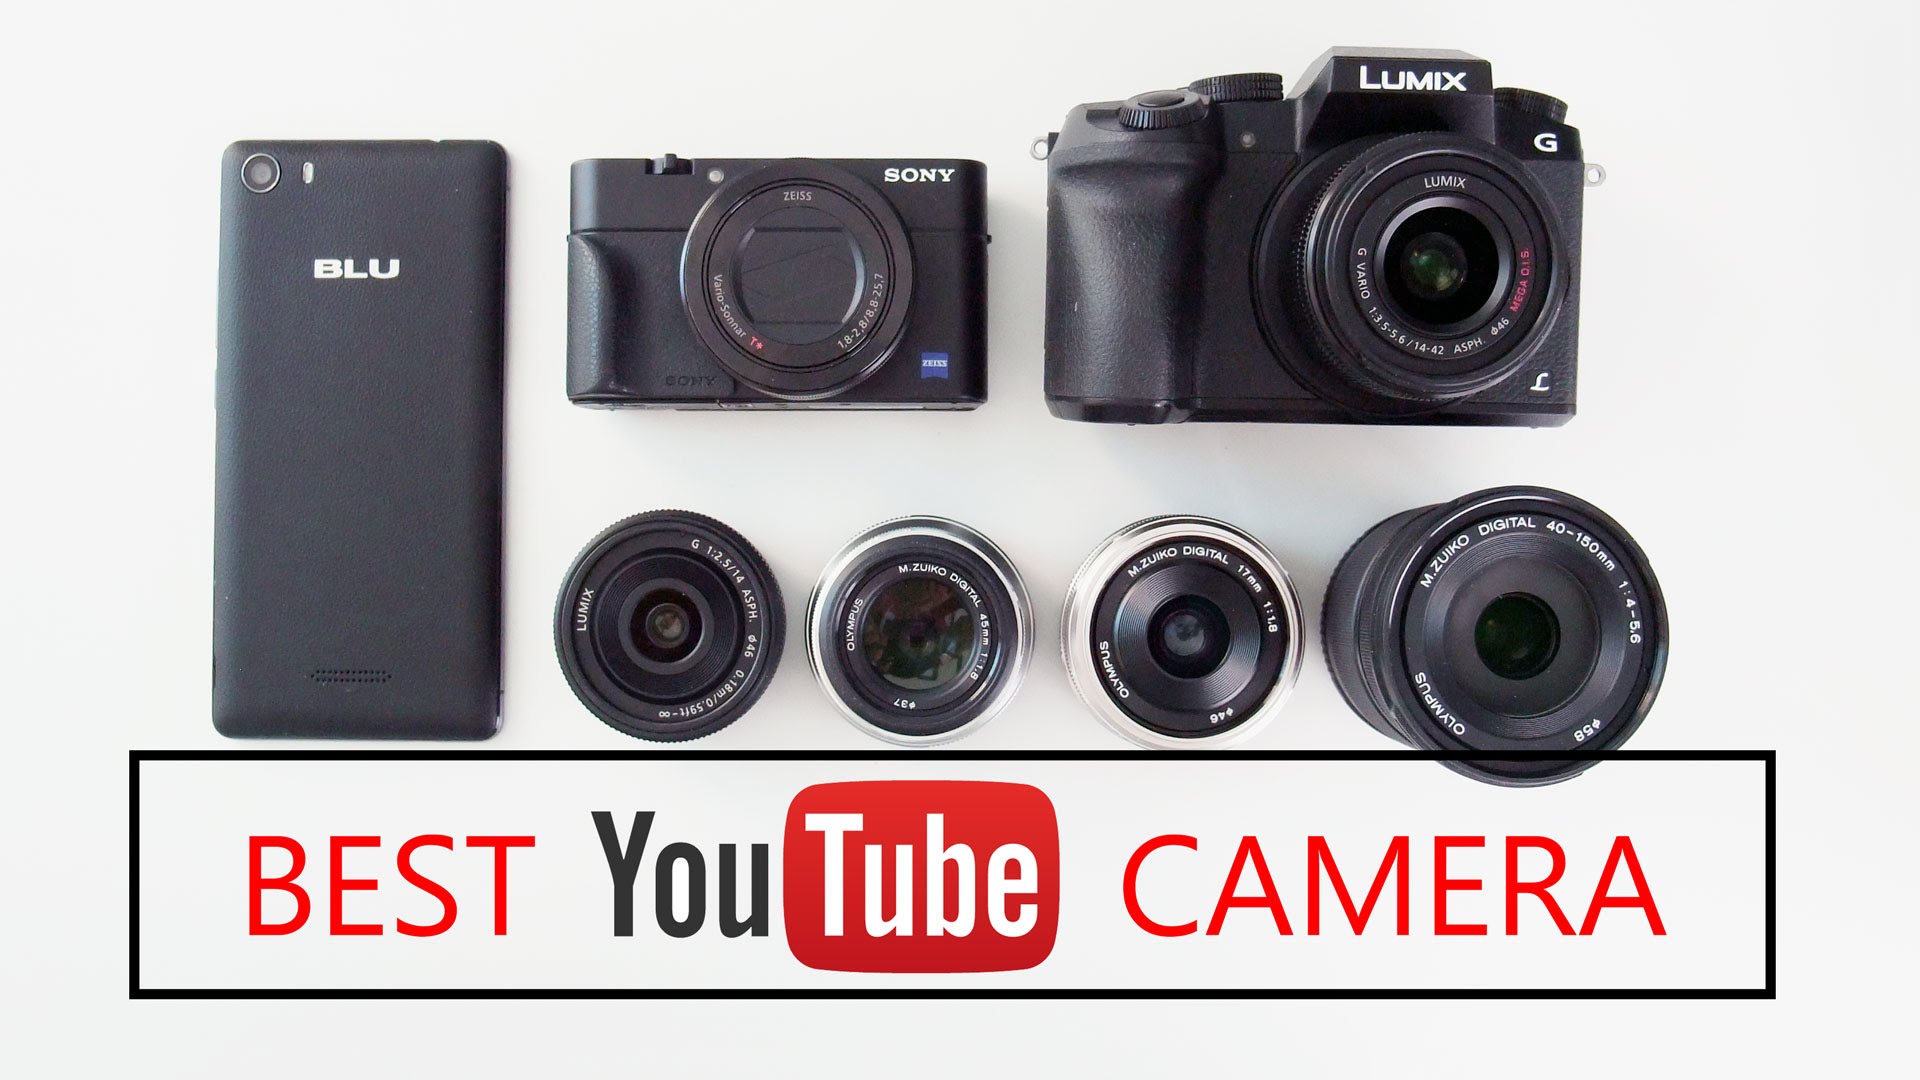 How to Choose the Best Camera for YouTube Videos Vlog – March 2016 – (Panasonic G7, Sony RX100 Mk3)